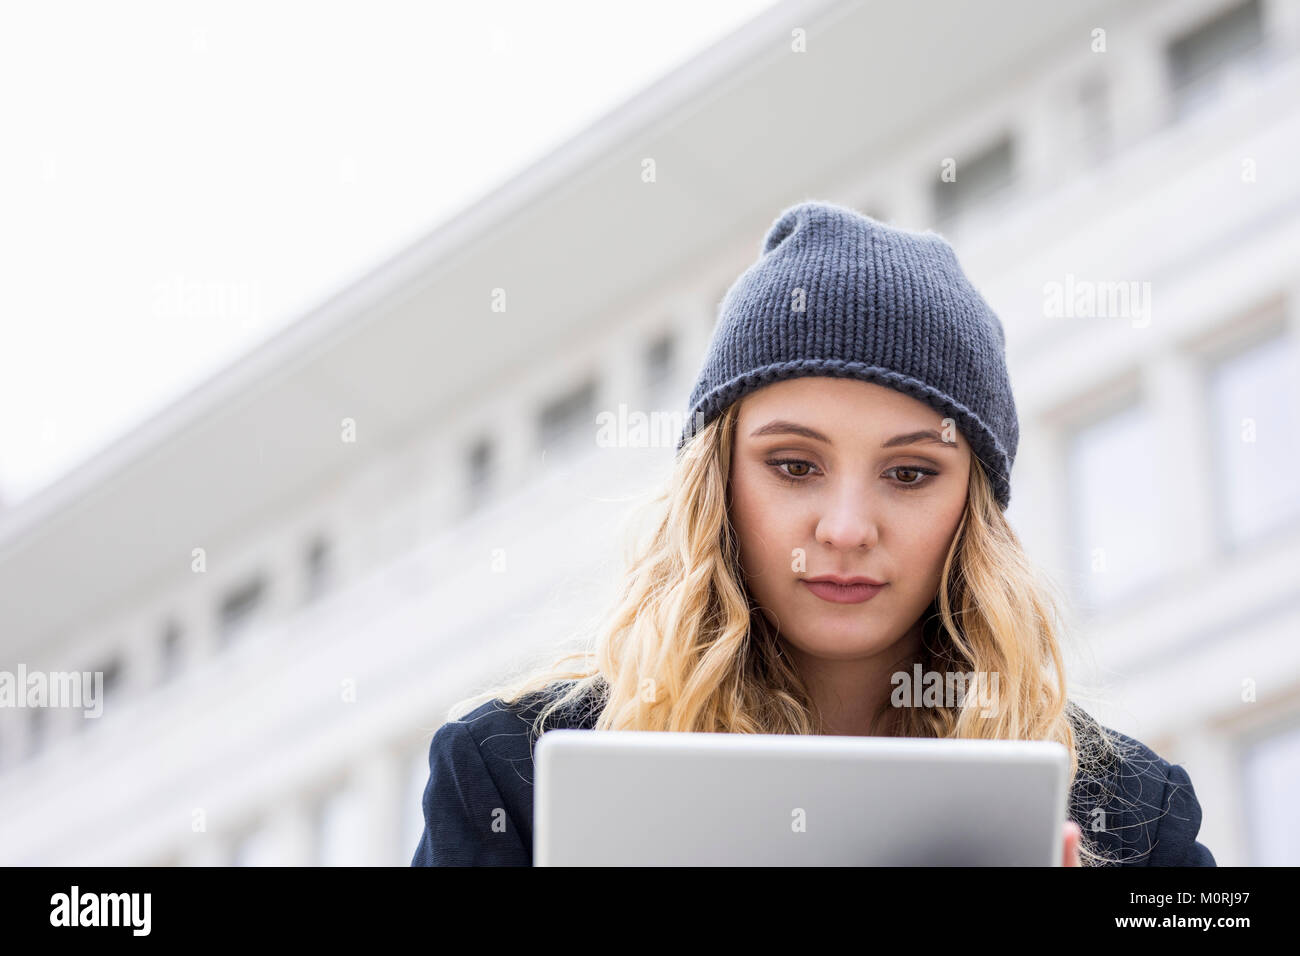 Portrait of young woman using tablet outdoors Banque D'Images